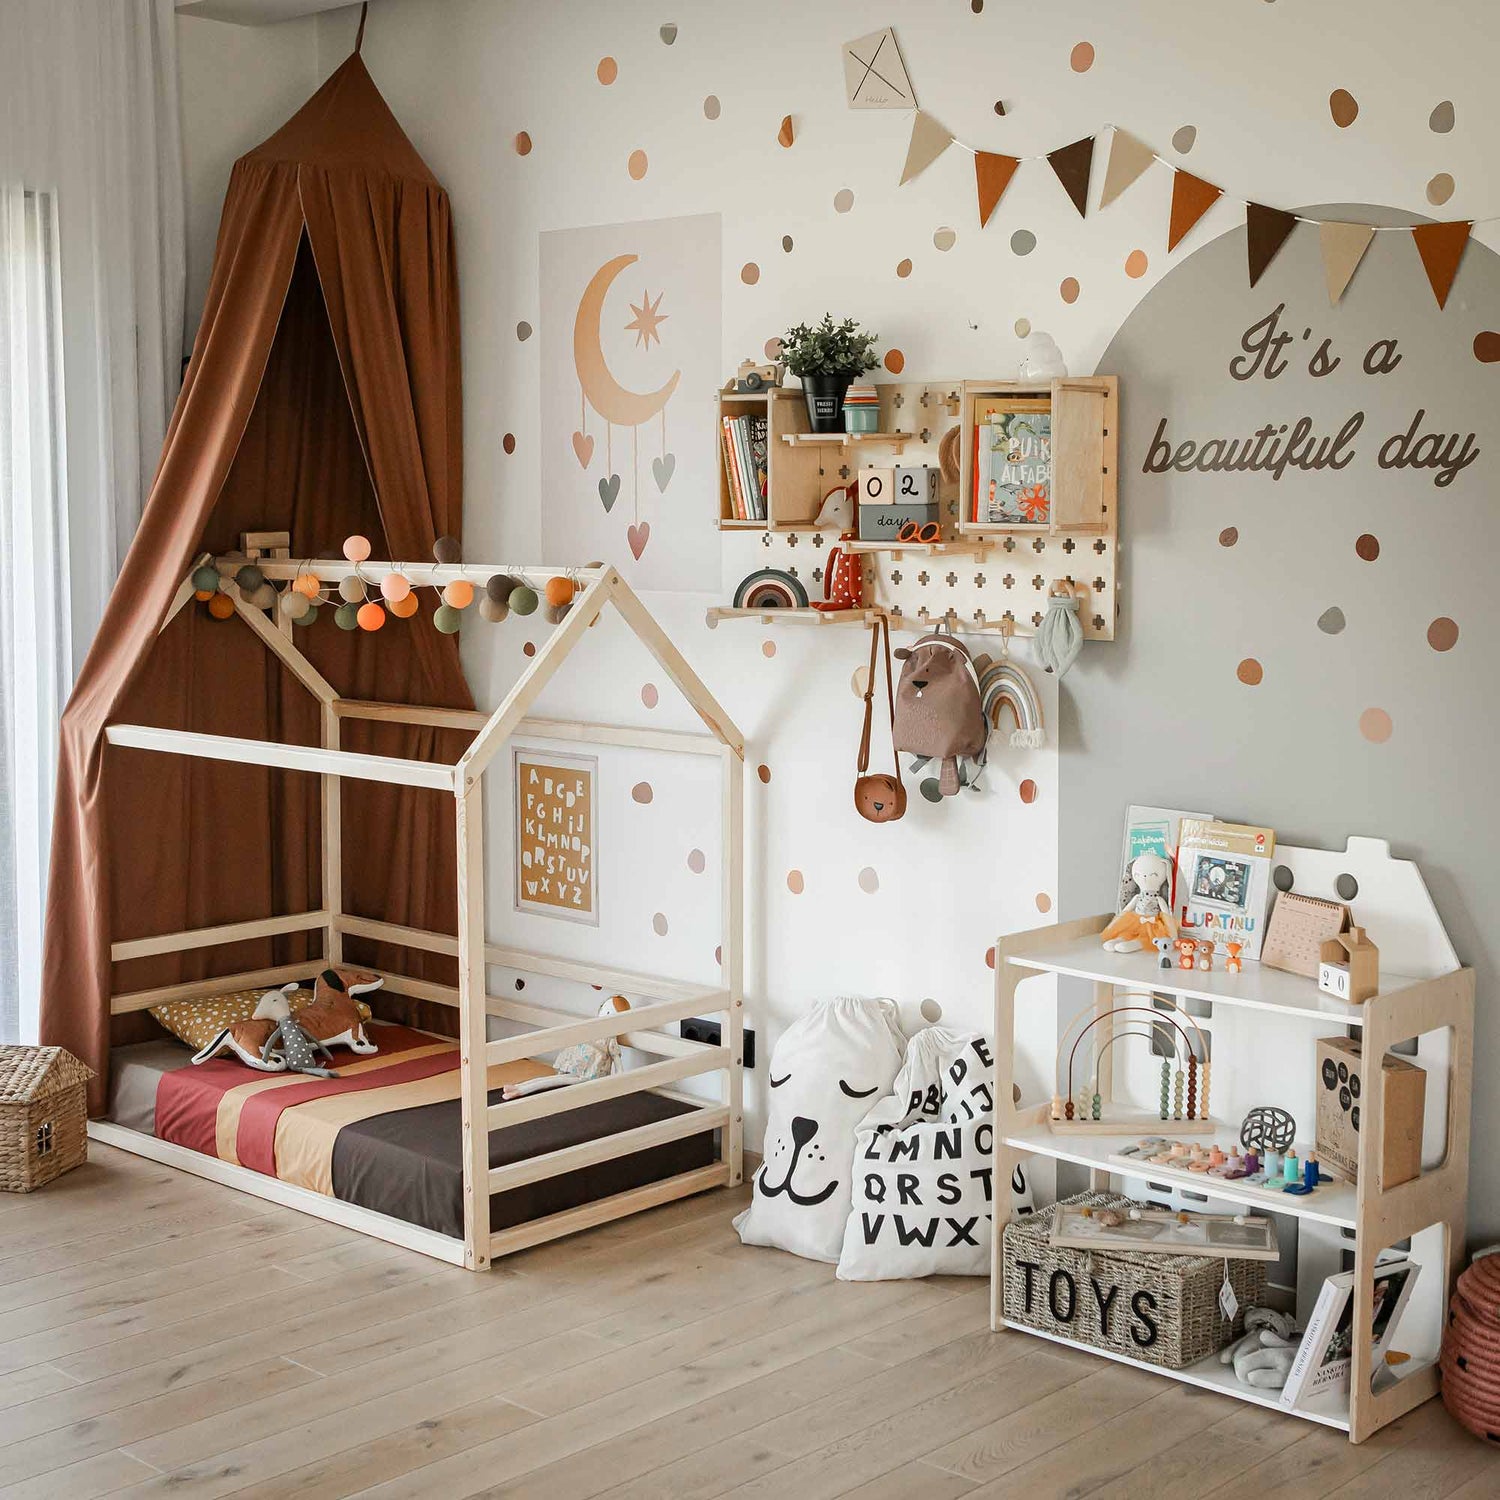 A children's bedroom with a house-shaped bed, toys, a play kitchen, a canopy, wall decorations, and an "It's a beautiful day" sign. Decor includes bunting, polka dots, and a wooden shelf with books and plants. A versatile Pegboard Wall Shelf offers expandable options for organizing toys and crafts.